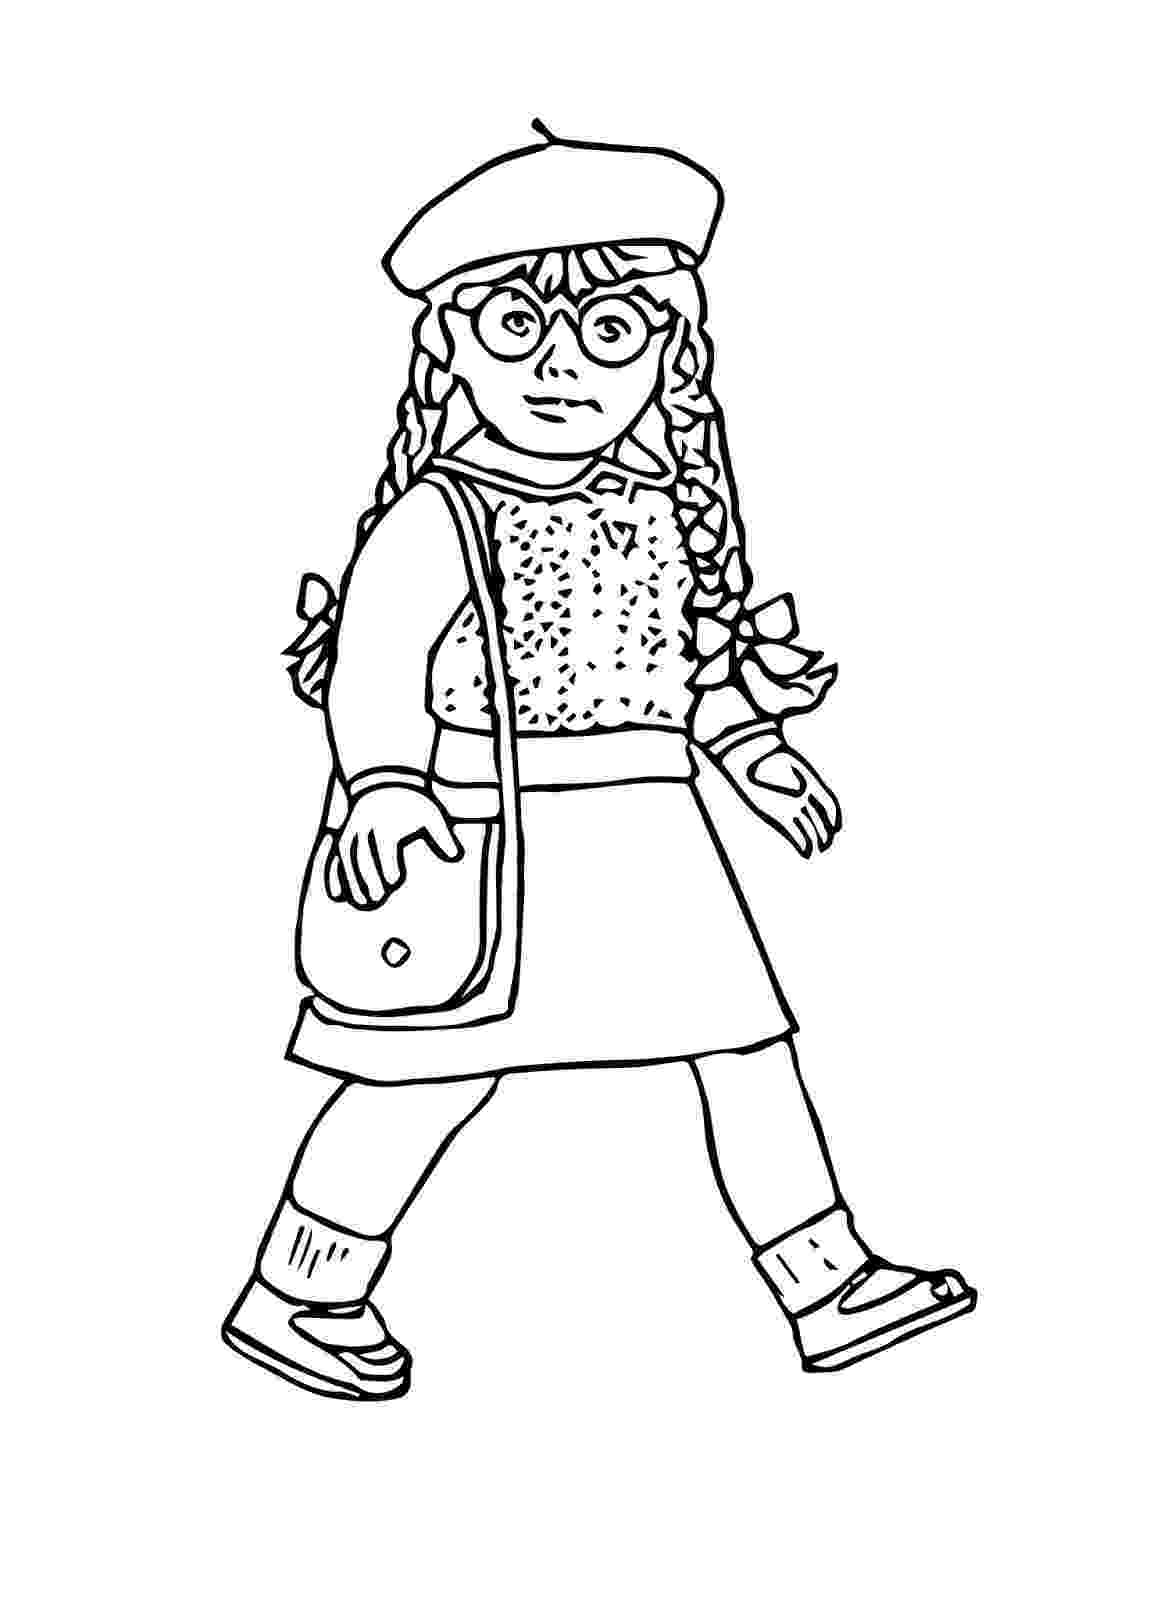 american girl coloring pages free american girl coloring pages best coloring pages for kids girl coloring free american pages 